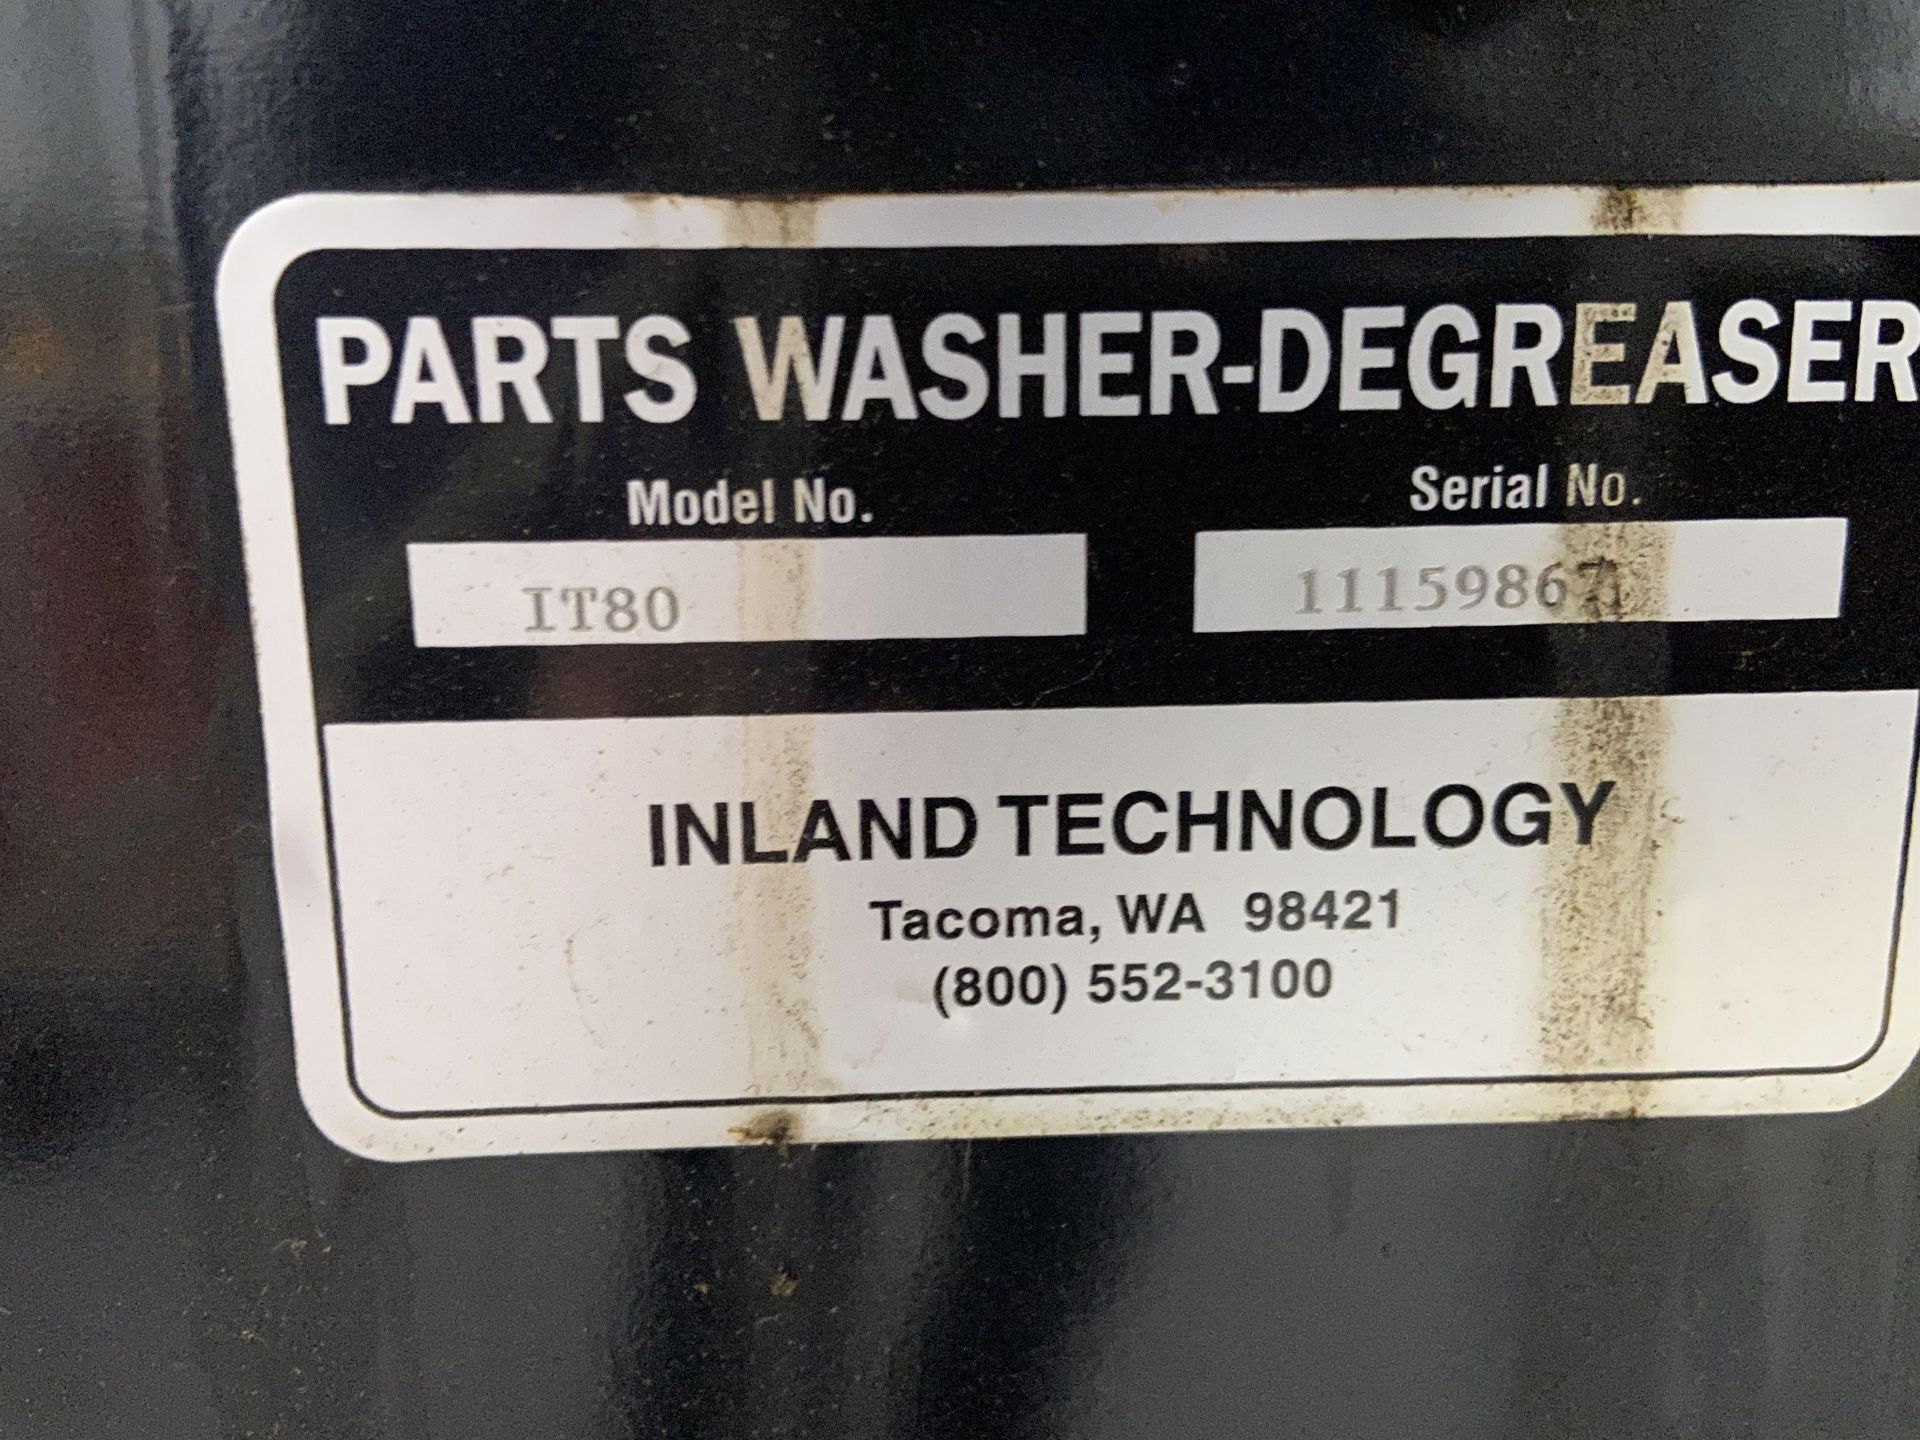 Inland Technology Model IT80 Dip Washer, 44" x 20" x 24" deep, Agitation, Elevation, s/n 11159867 - Image 3 of 3